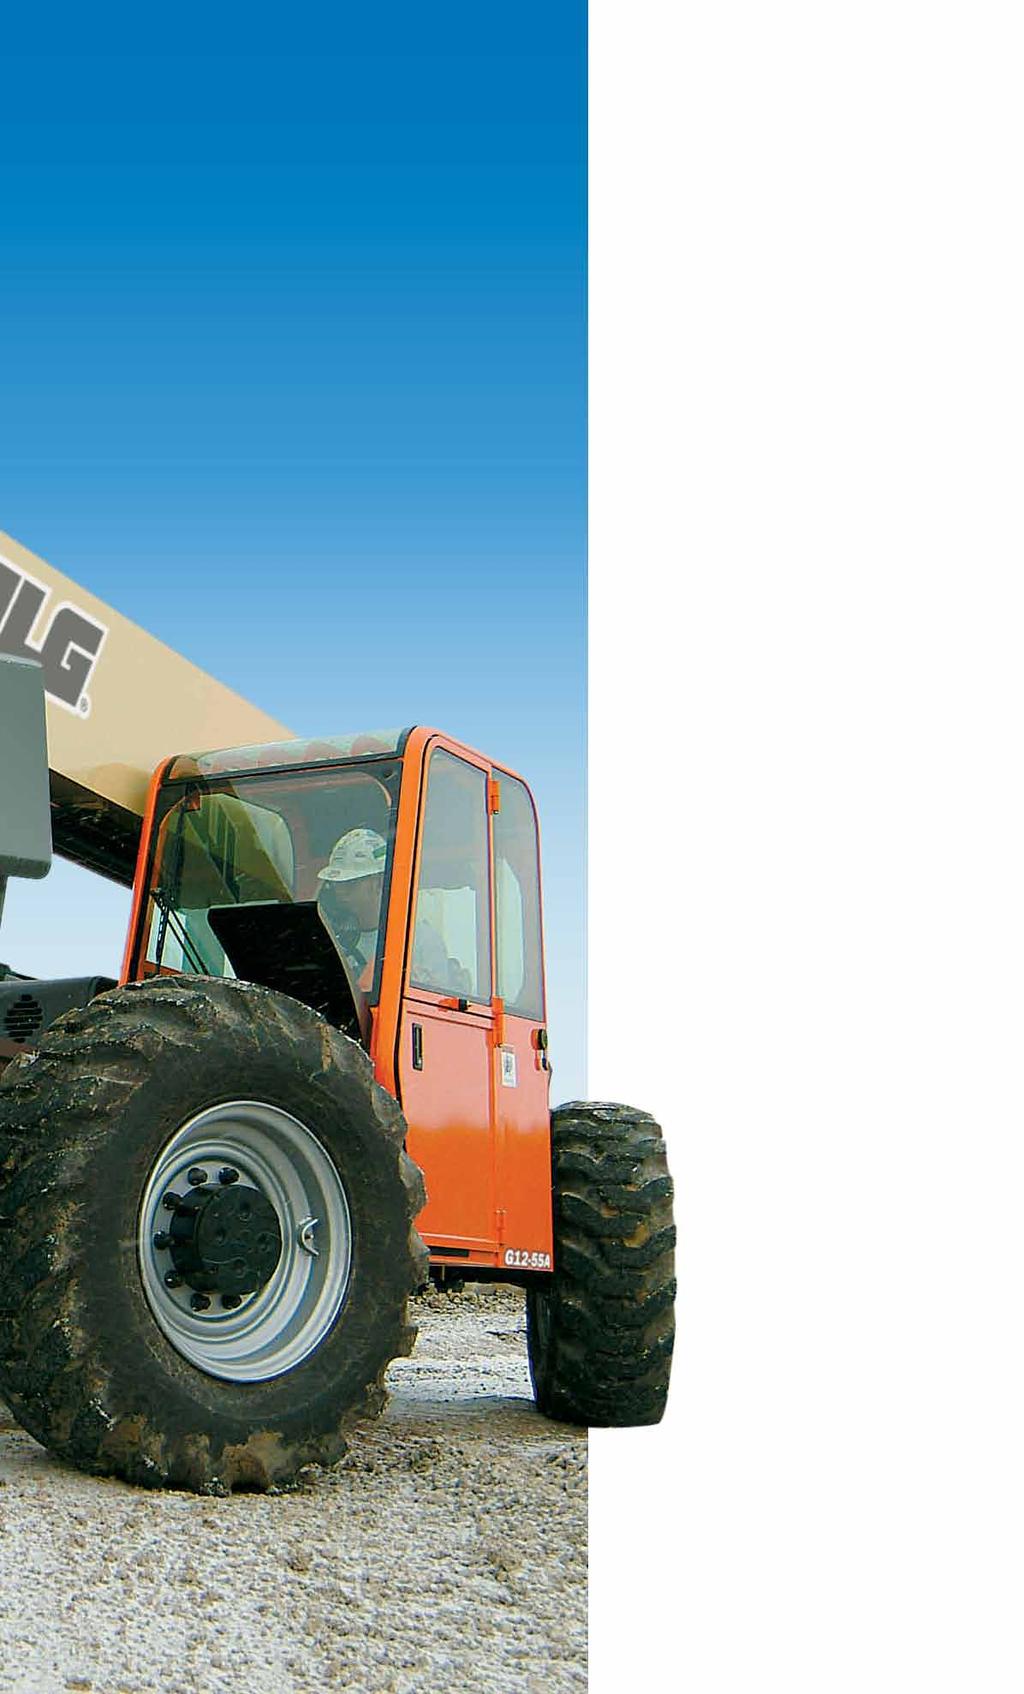 Meet Your Tough Telehandler Lineup. Your productivity is on the line the minute you climb into the telehandler cab.